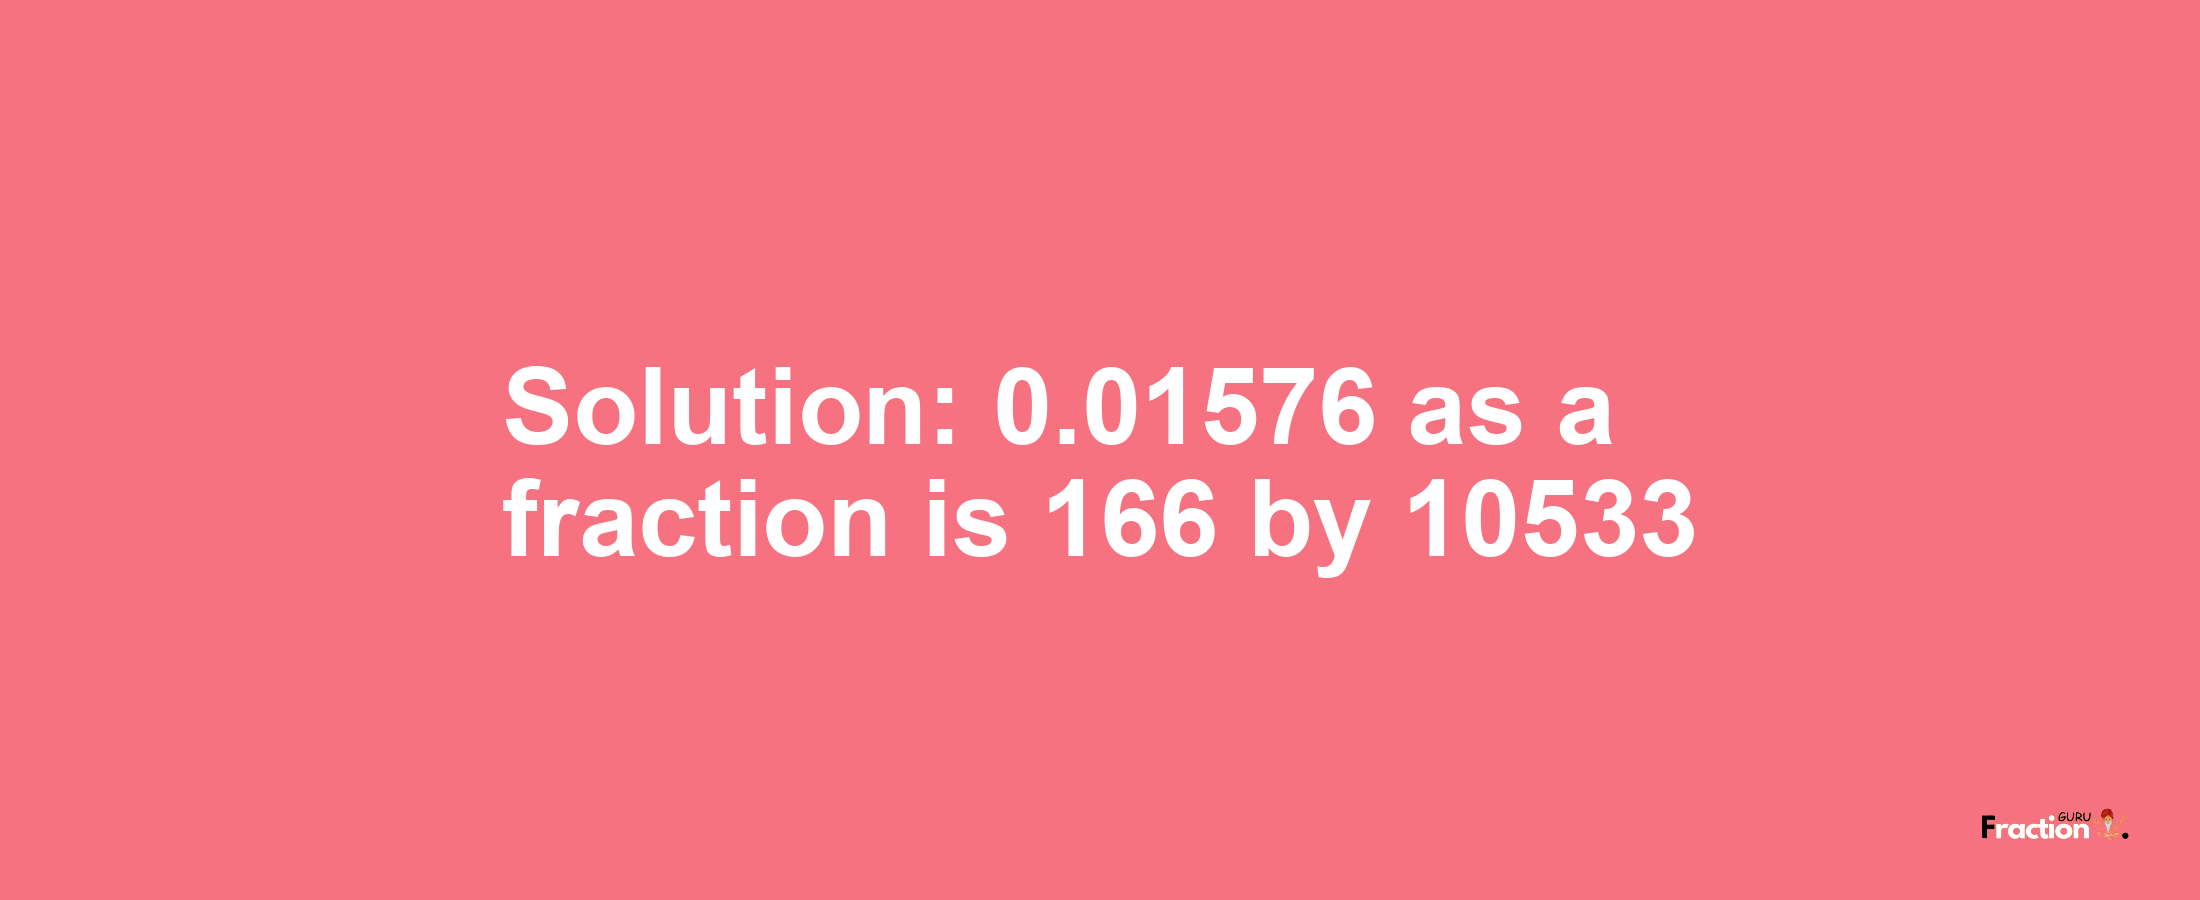 Solution:0.01576 as a fraction is 166/10533